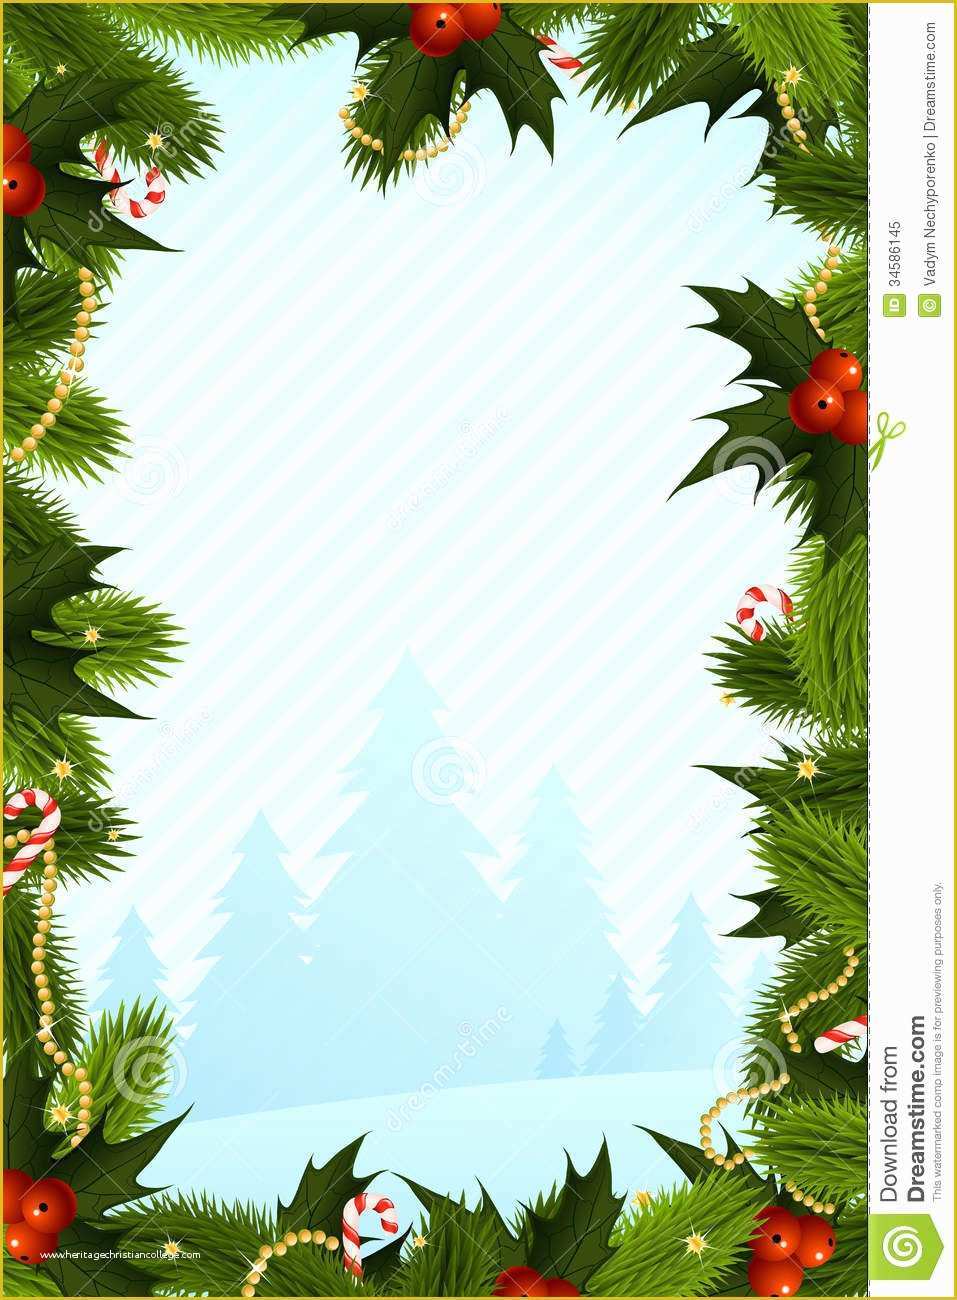 Free Photo Christmas Card Templates Of Christmas Card Template Stock Vector Illustration Of